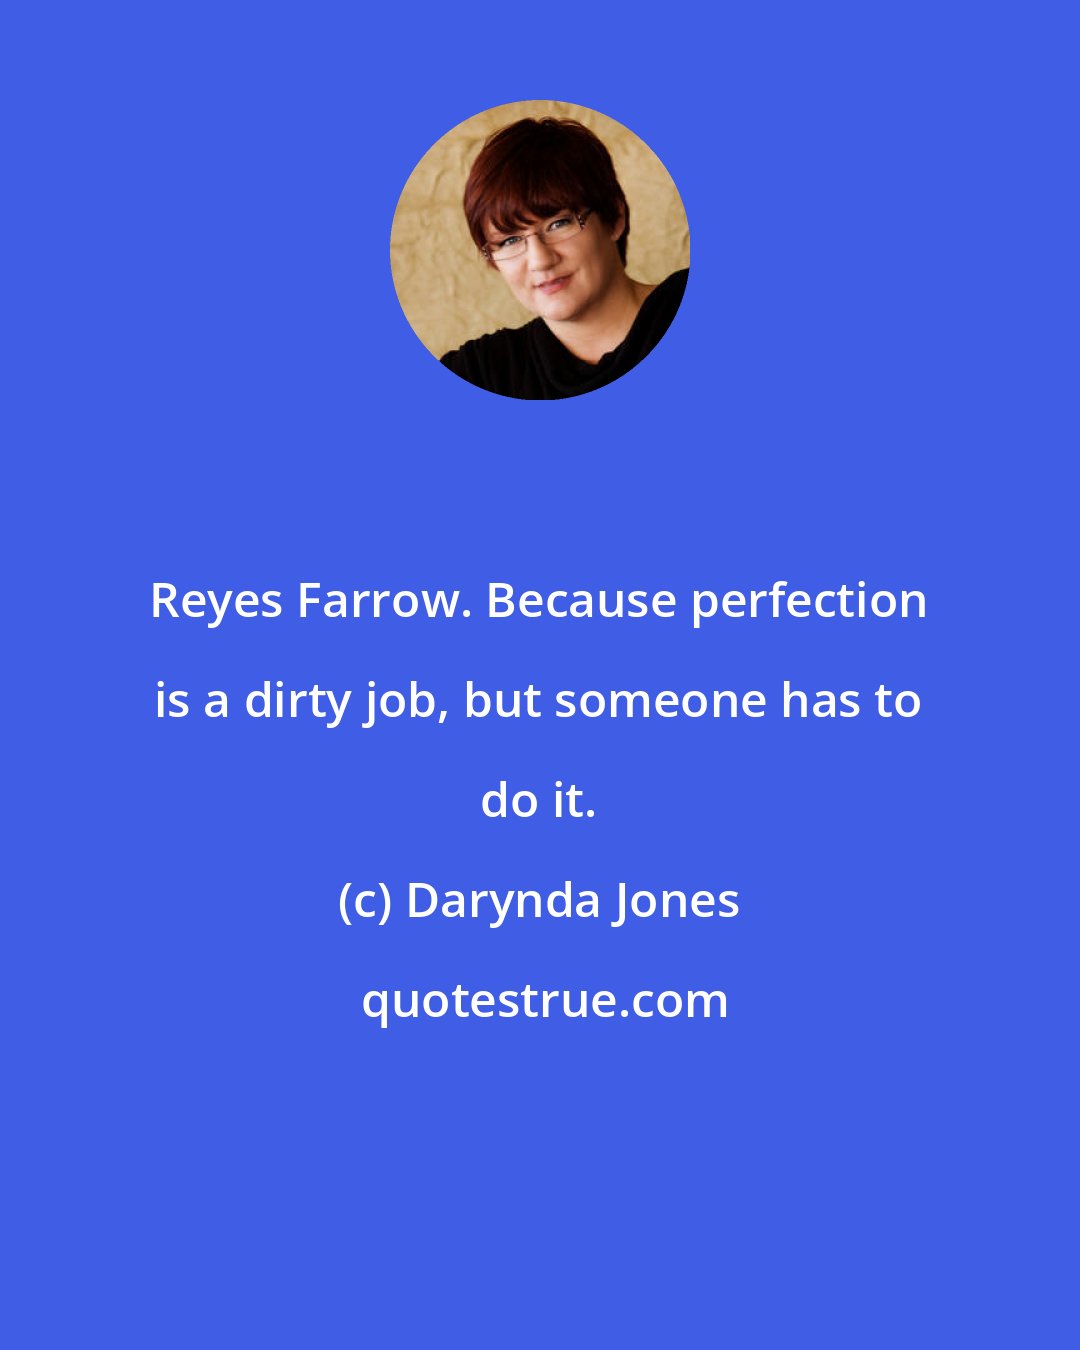 Darynda Jones: Reyes Farrow. Because perfection is a dirty job, but someone has to do it.